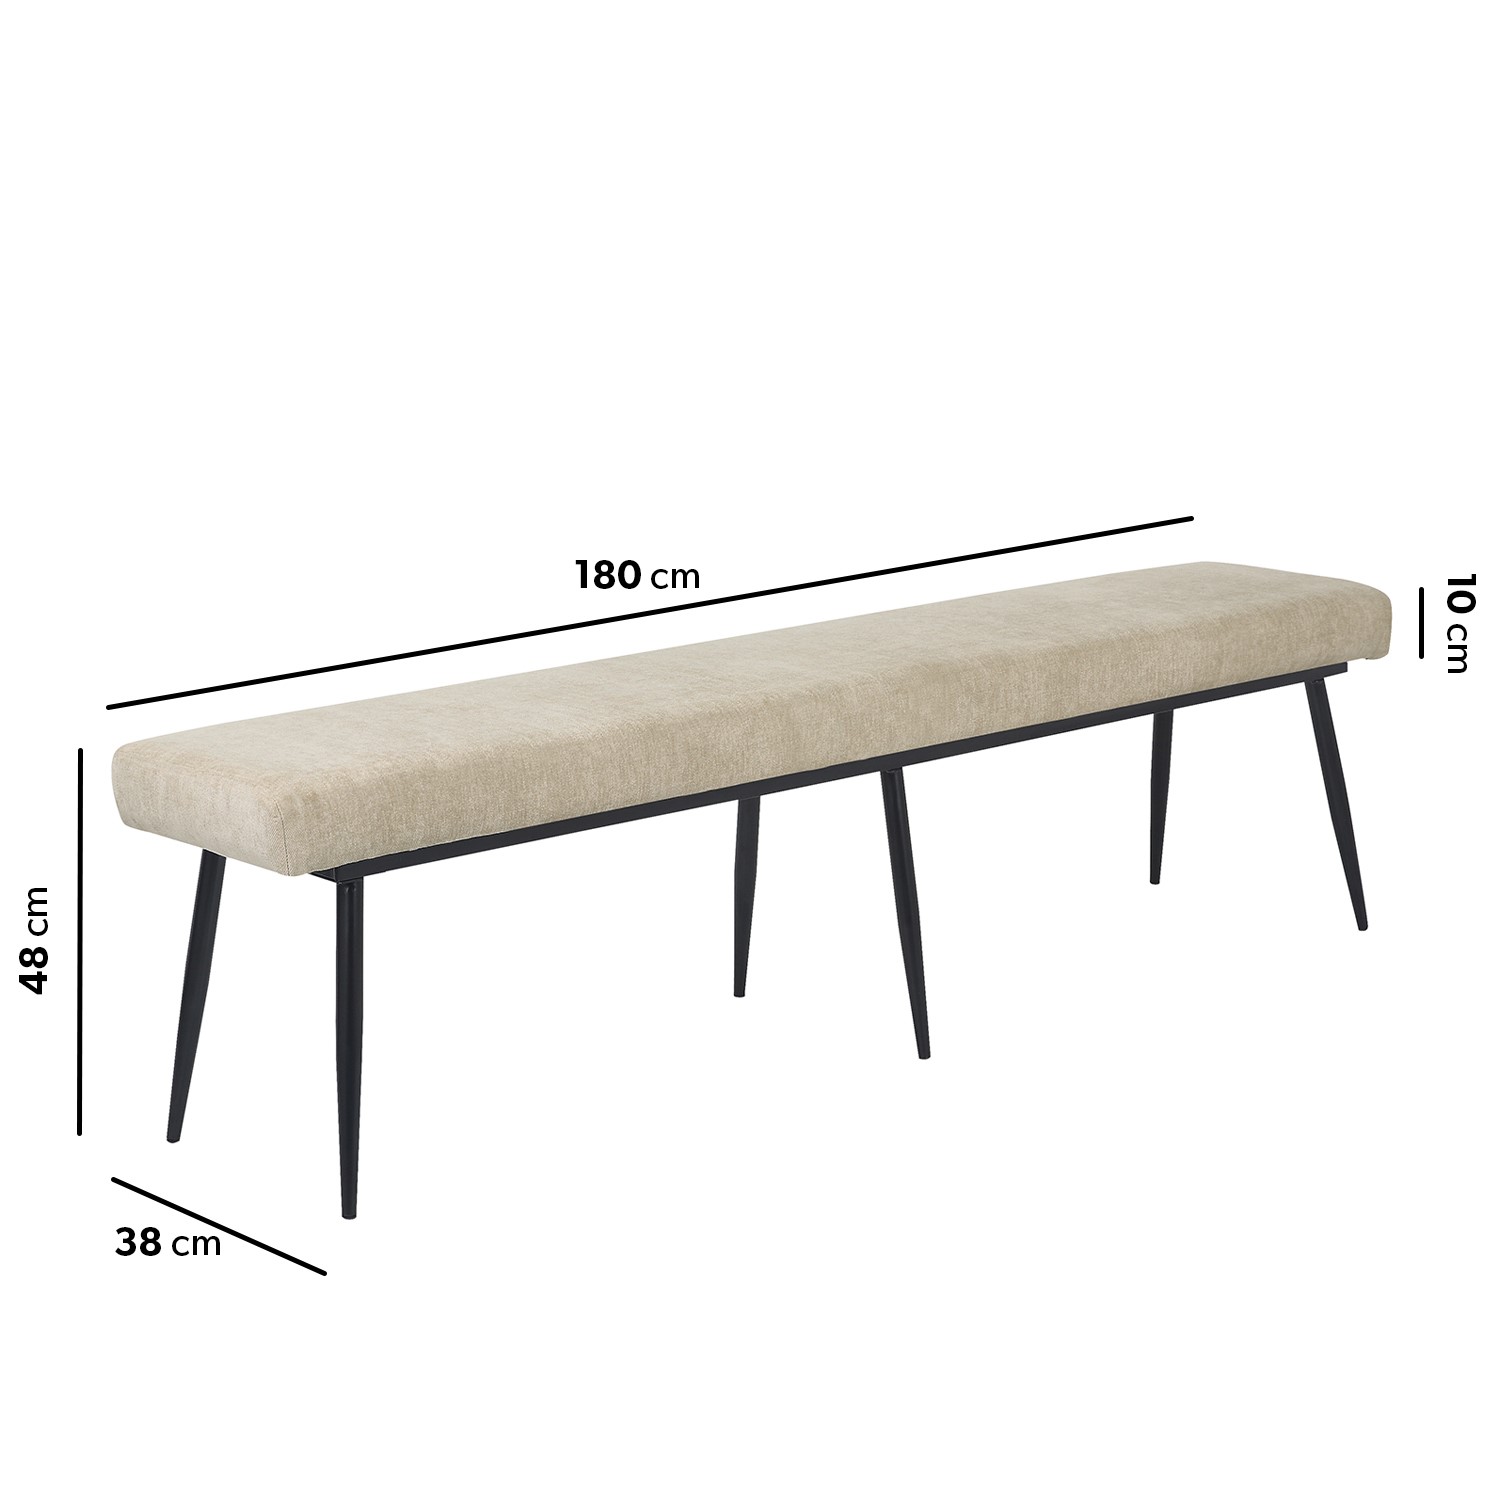 Read more about Large beige chenille upholstered dining bench seats 3 colbie